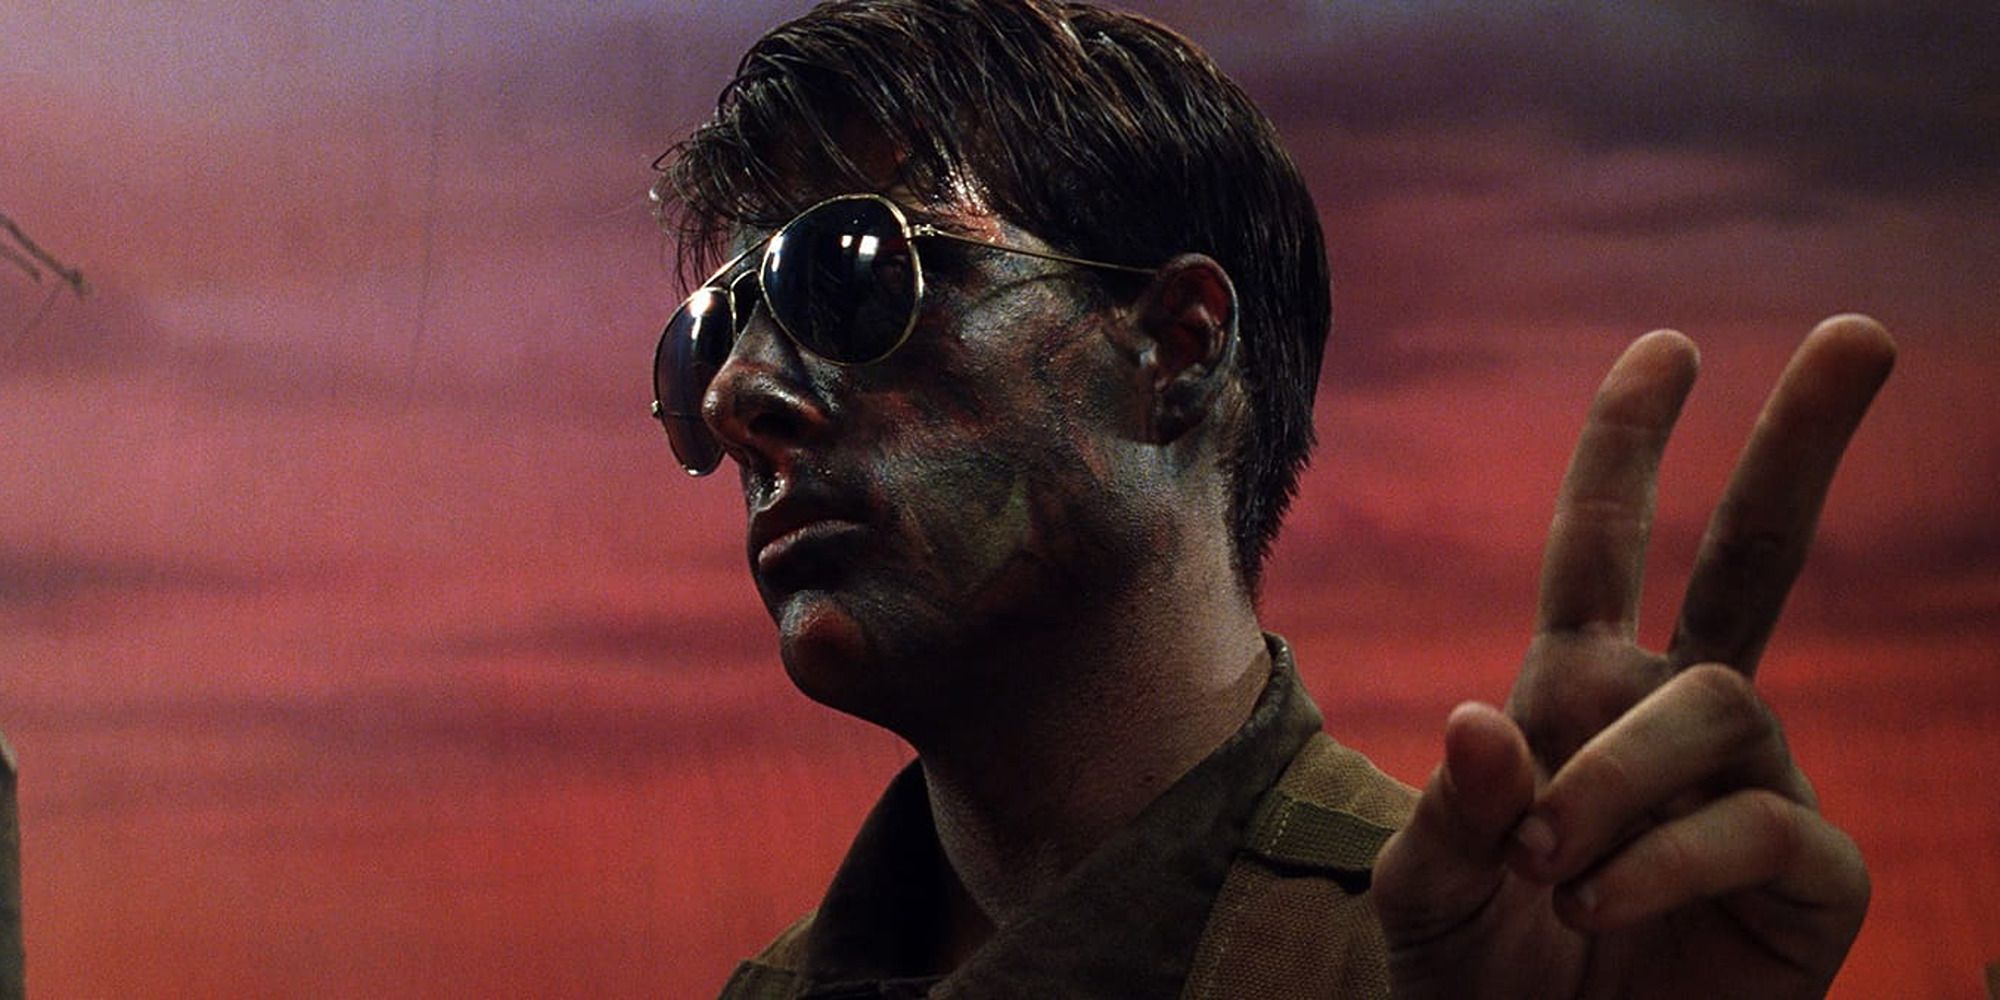 Man with sunglasses and war paint on his face doing peace sign